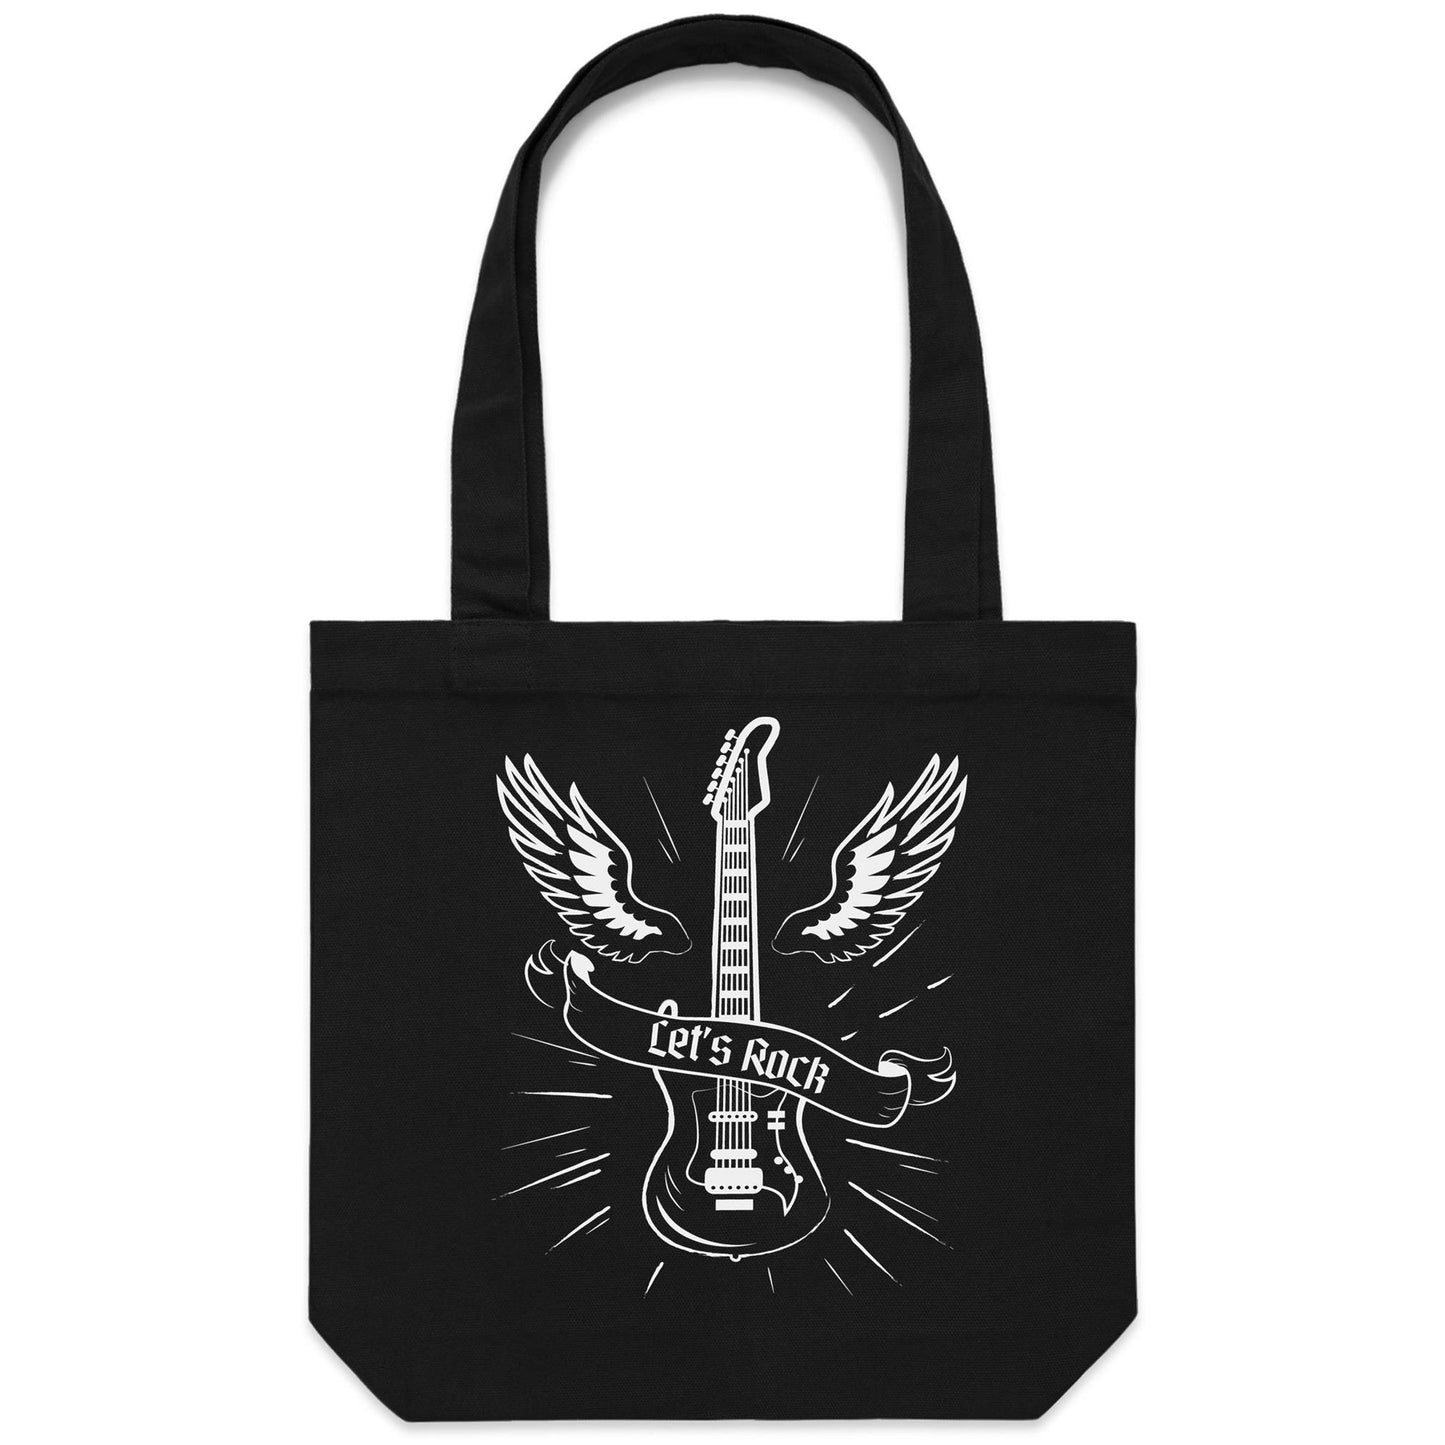 Let's Rock - Canvas Tote Bag Black One Size Tote Bag Music